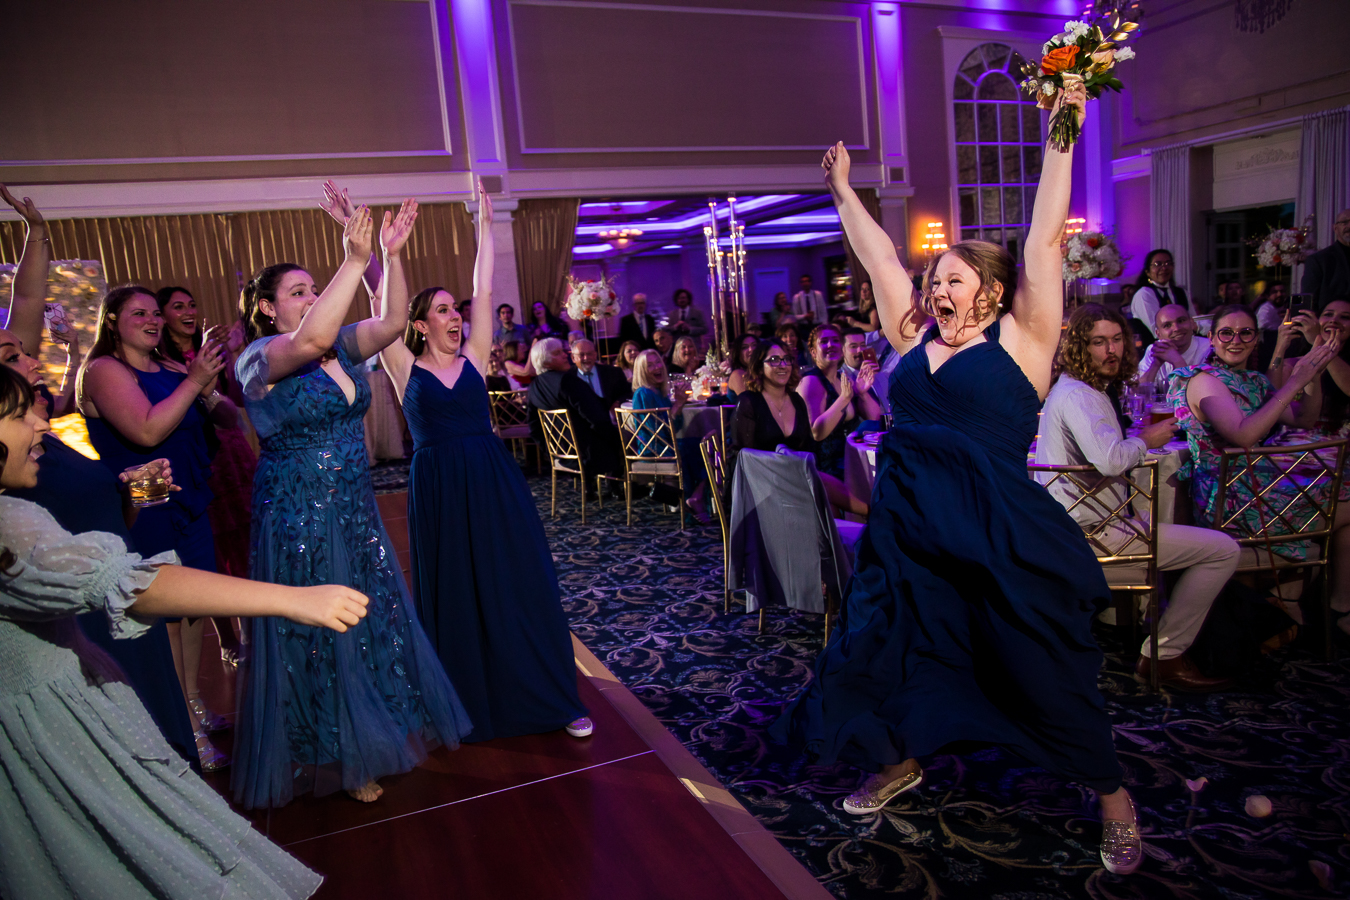 authentic wedding photographer, lisa rhinehart, captures this fun, authentic image of a bridesmaids reaction to catching the bouquet 